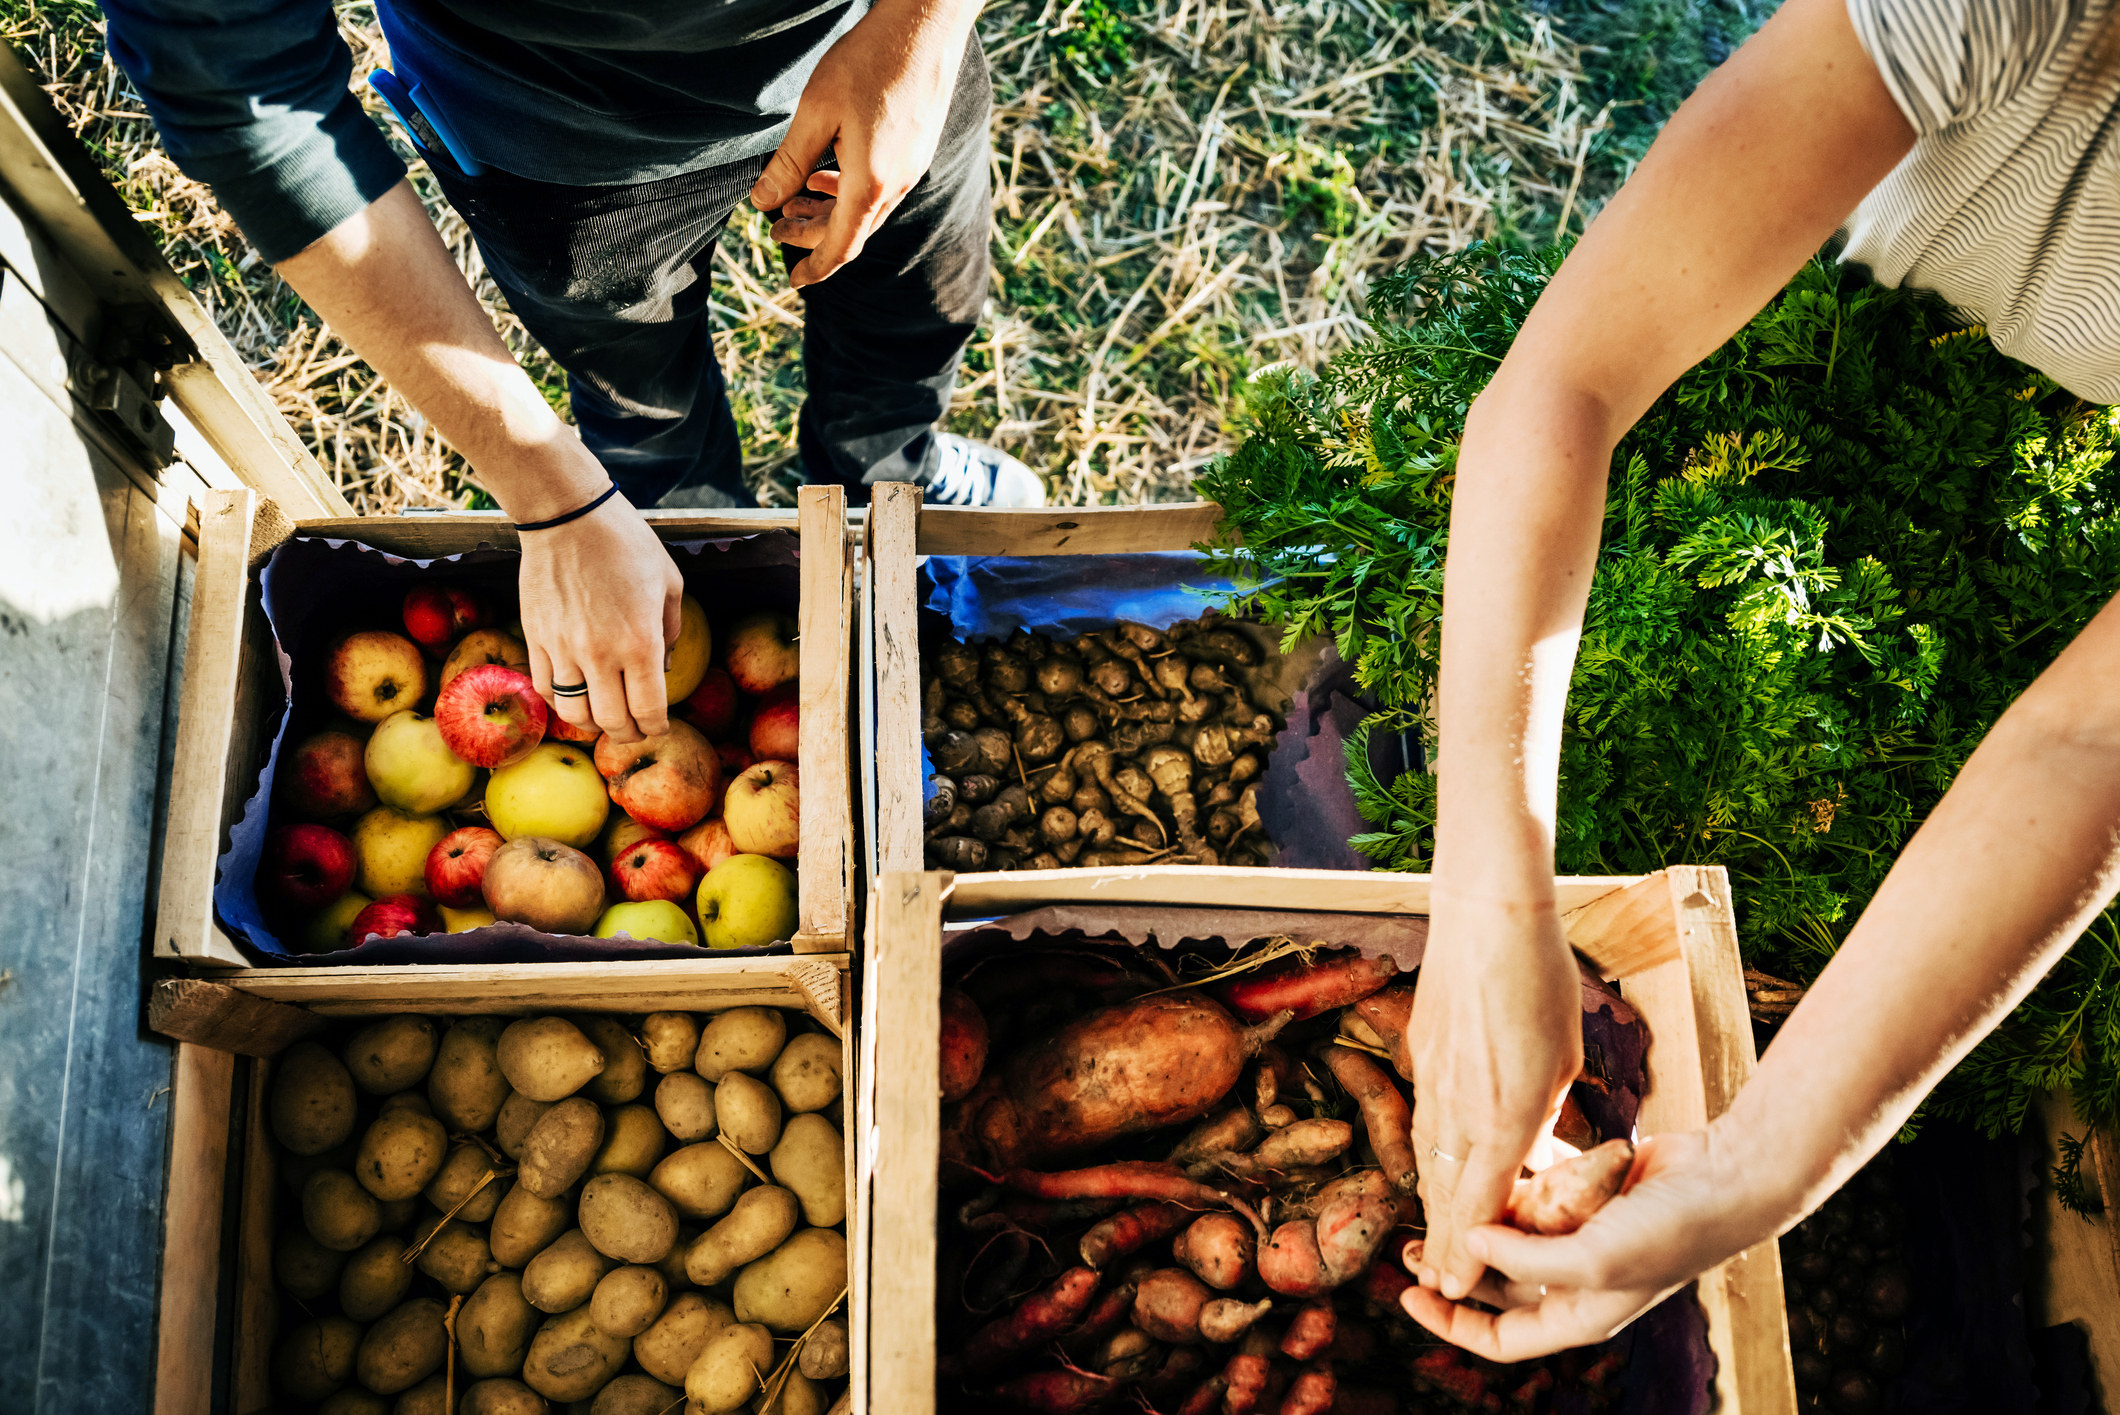 One thing “Sustainable Diets” by Pamela Mason and Tim Lang taught Heidi Yu Spurrell was the importance of buying from smallholders at farmers’ markets and supporting small businesses. Photo: Getty Images